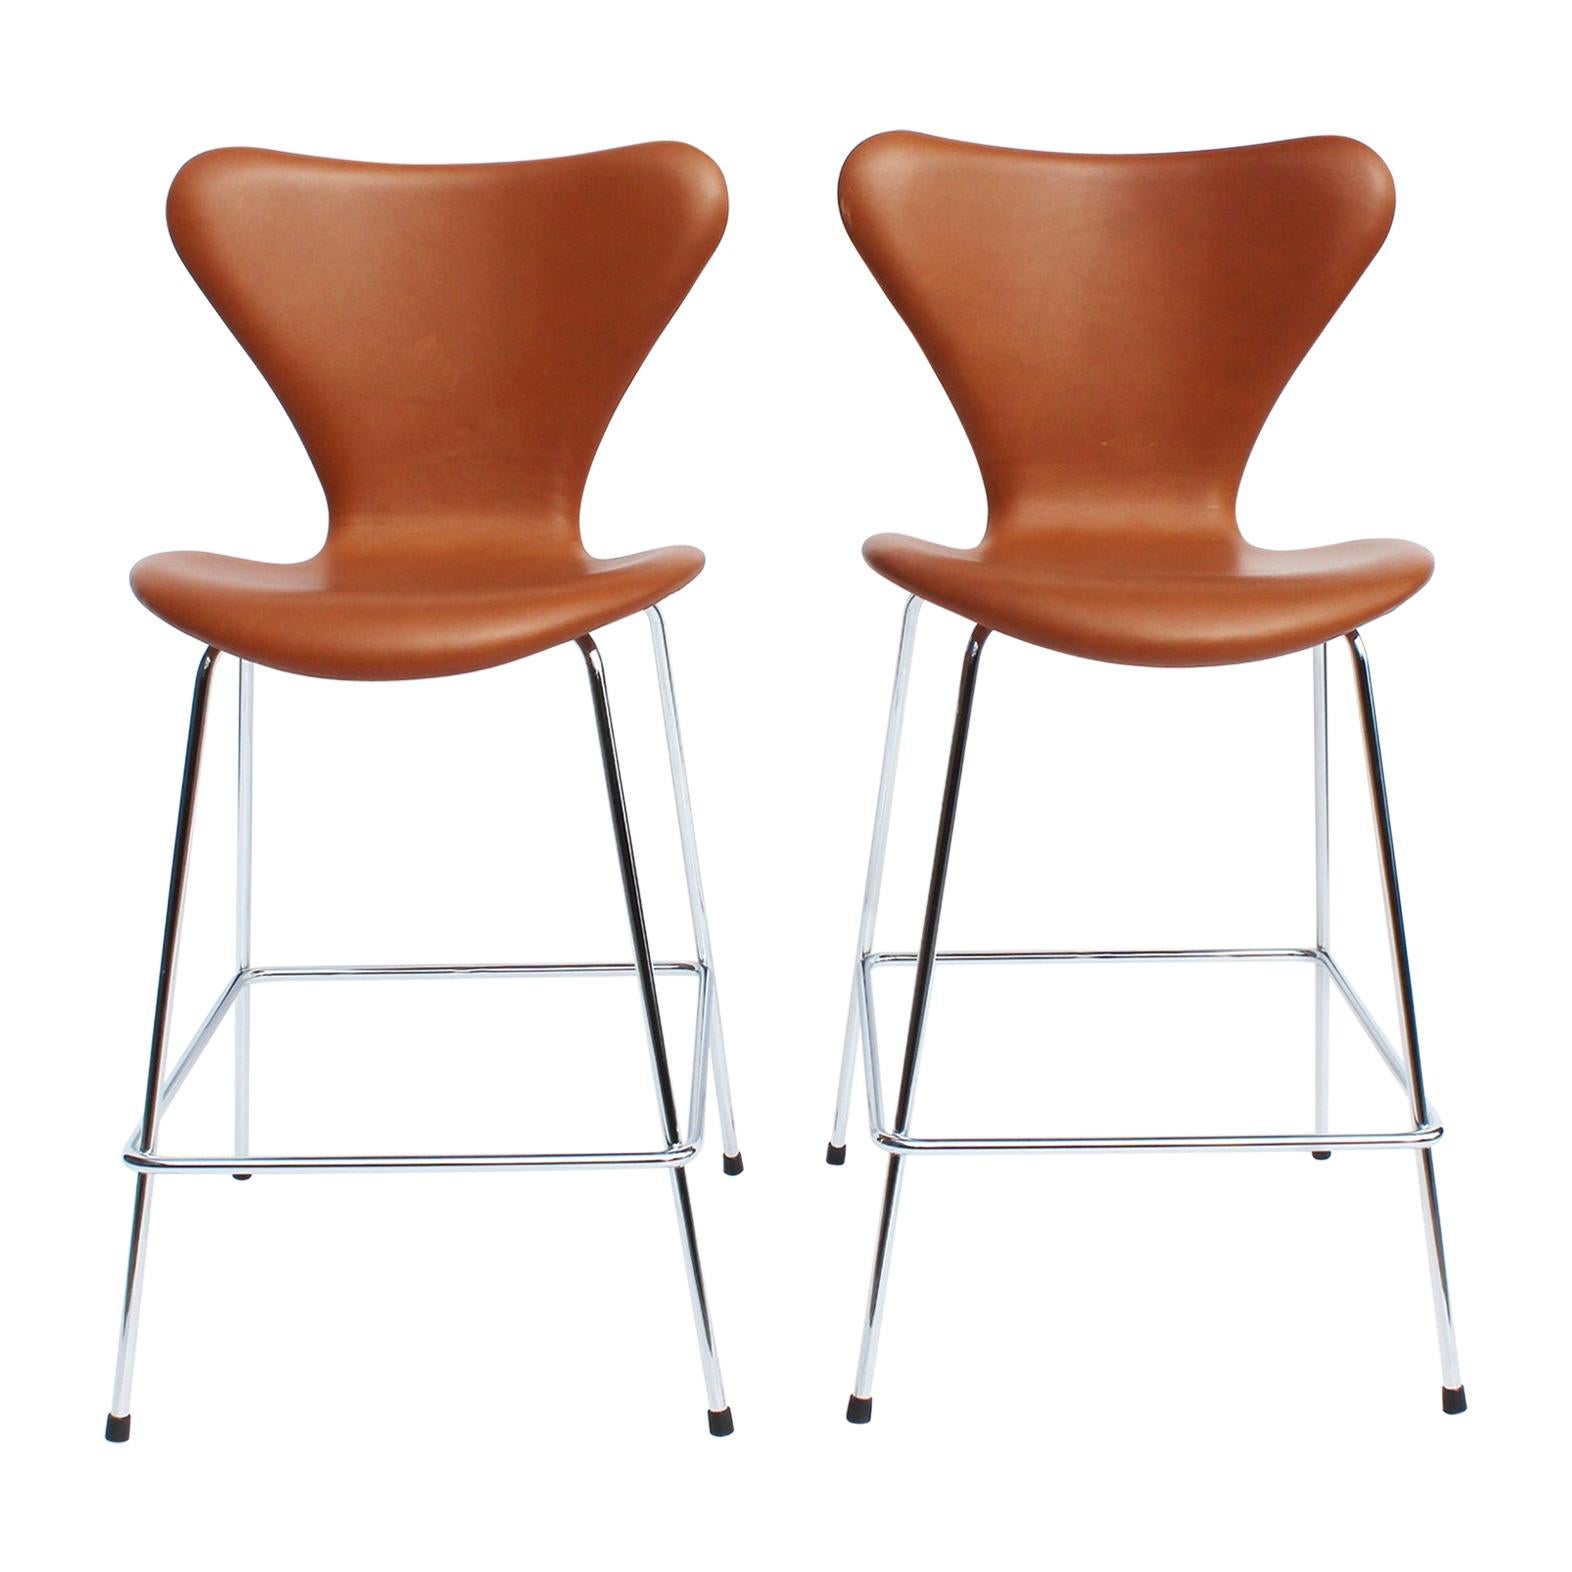 Pair of Seven Bar Stools, Model 3187, with Cognac Leather by Arne Jacobsen